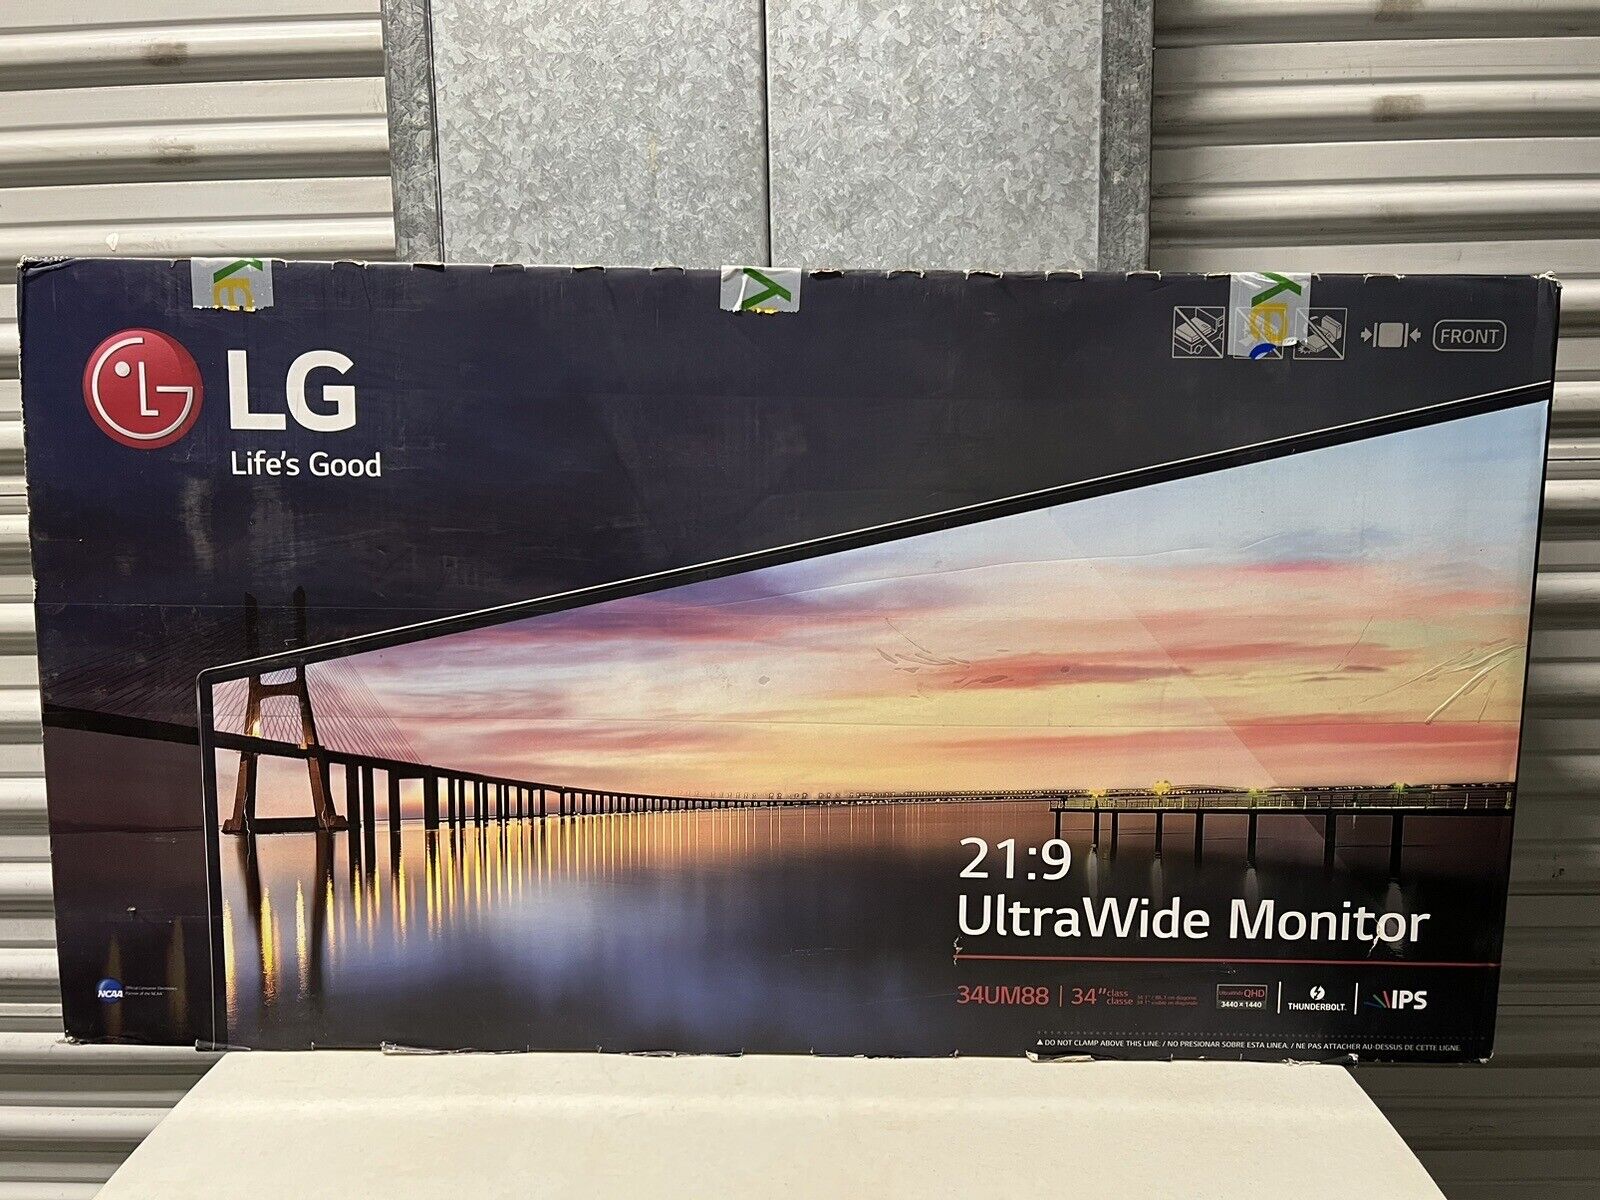 LG 34UM88 21:9 34 inches UltraWide QHD Monitor Excellent Condition Pick up LA CA